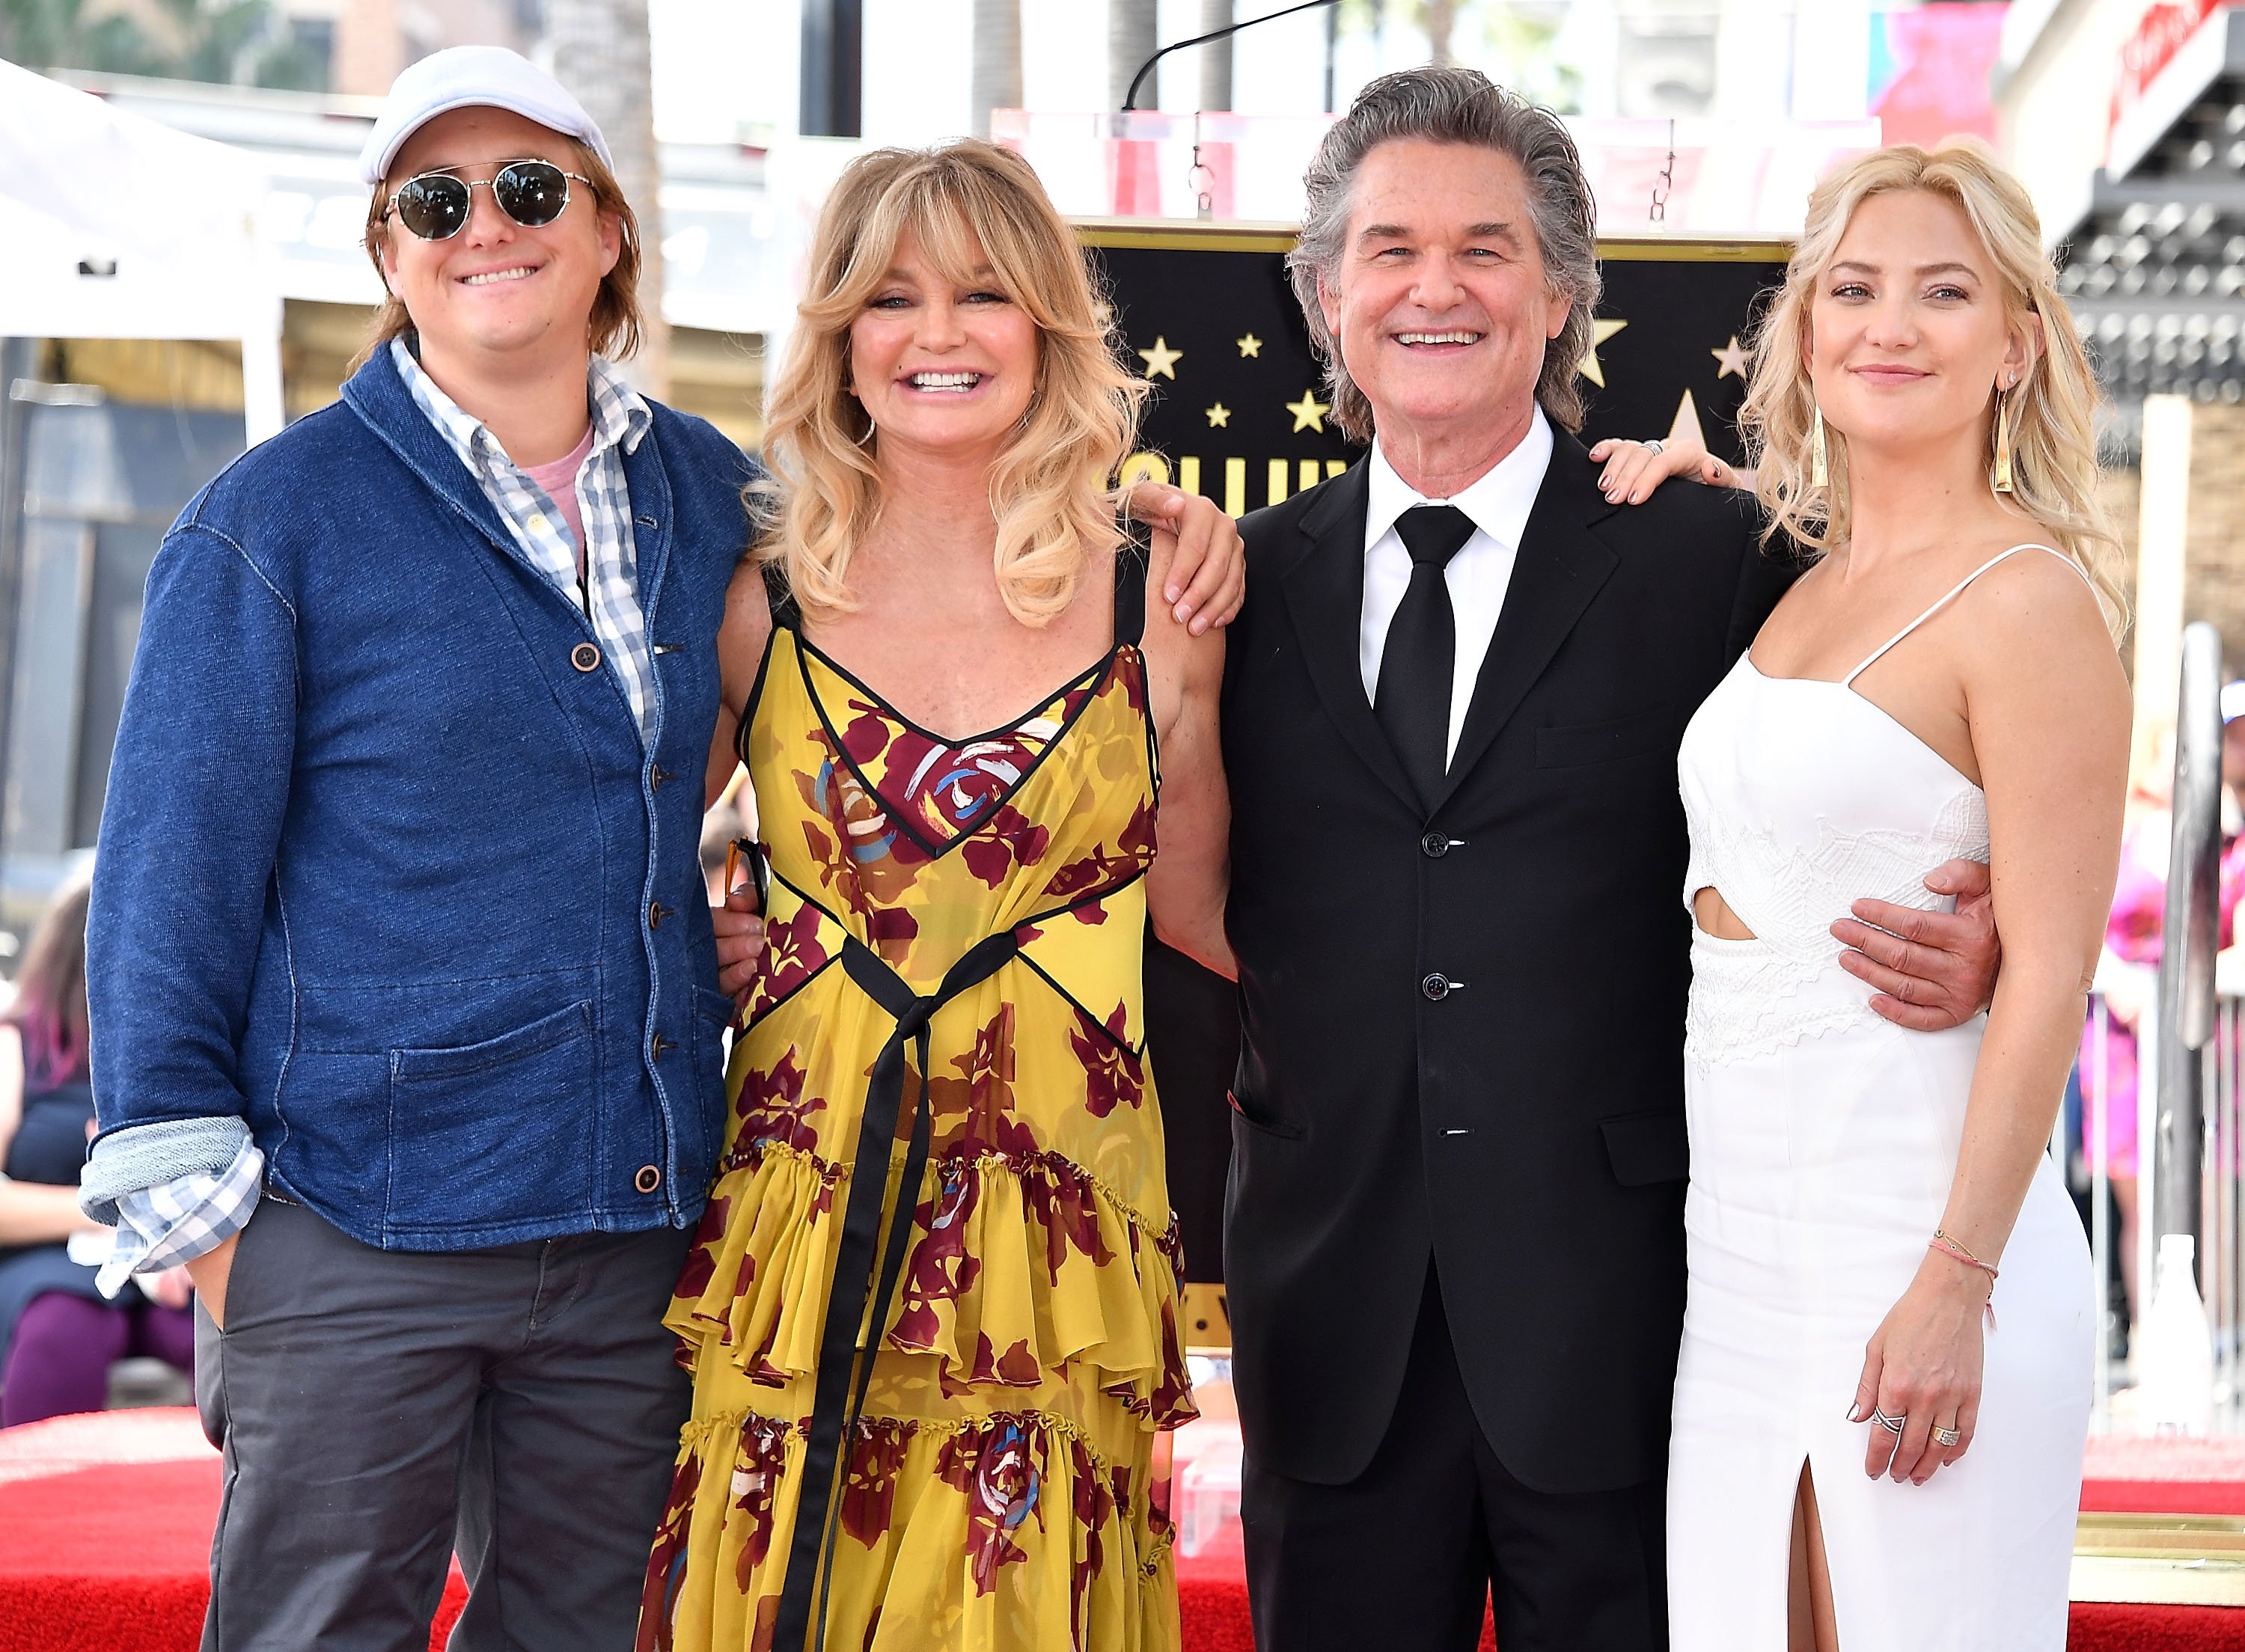 Boston Russell, Goldie Hawn, Kurt Russell, and Kate Hudson as Goldie Hawn and Kurt Russell are honored with the double star On The Hollywood Walk Of Fame on May 4, 2017 | Source: Getty Images